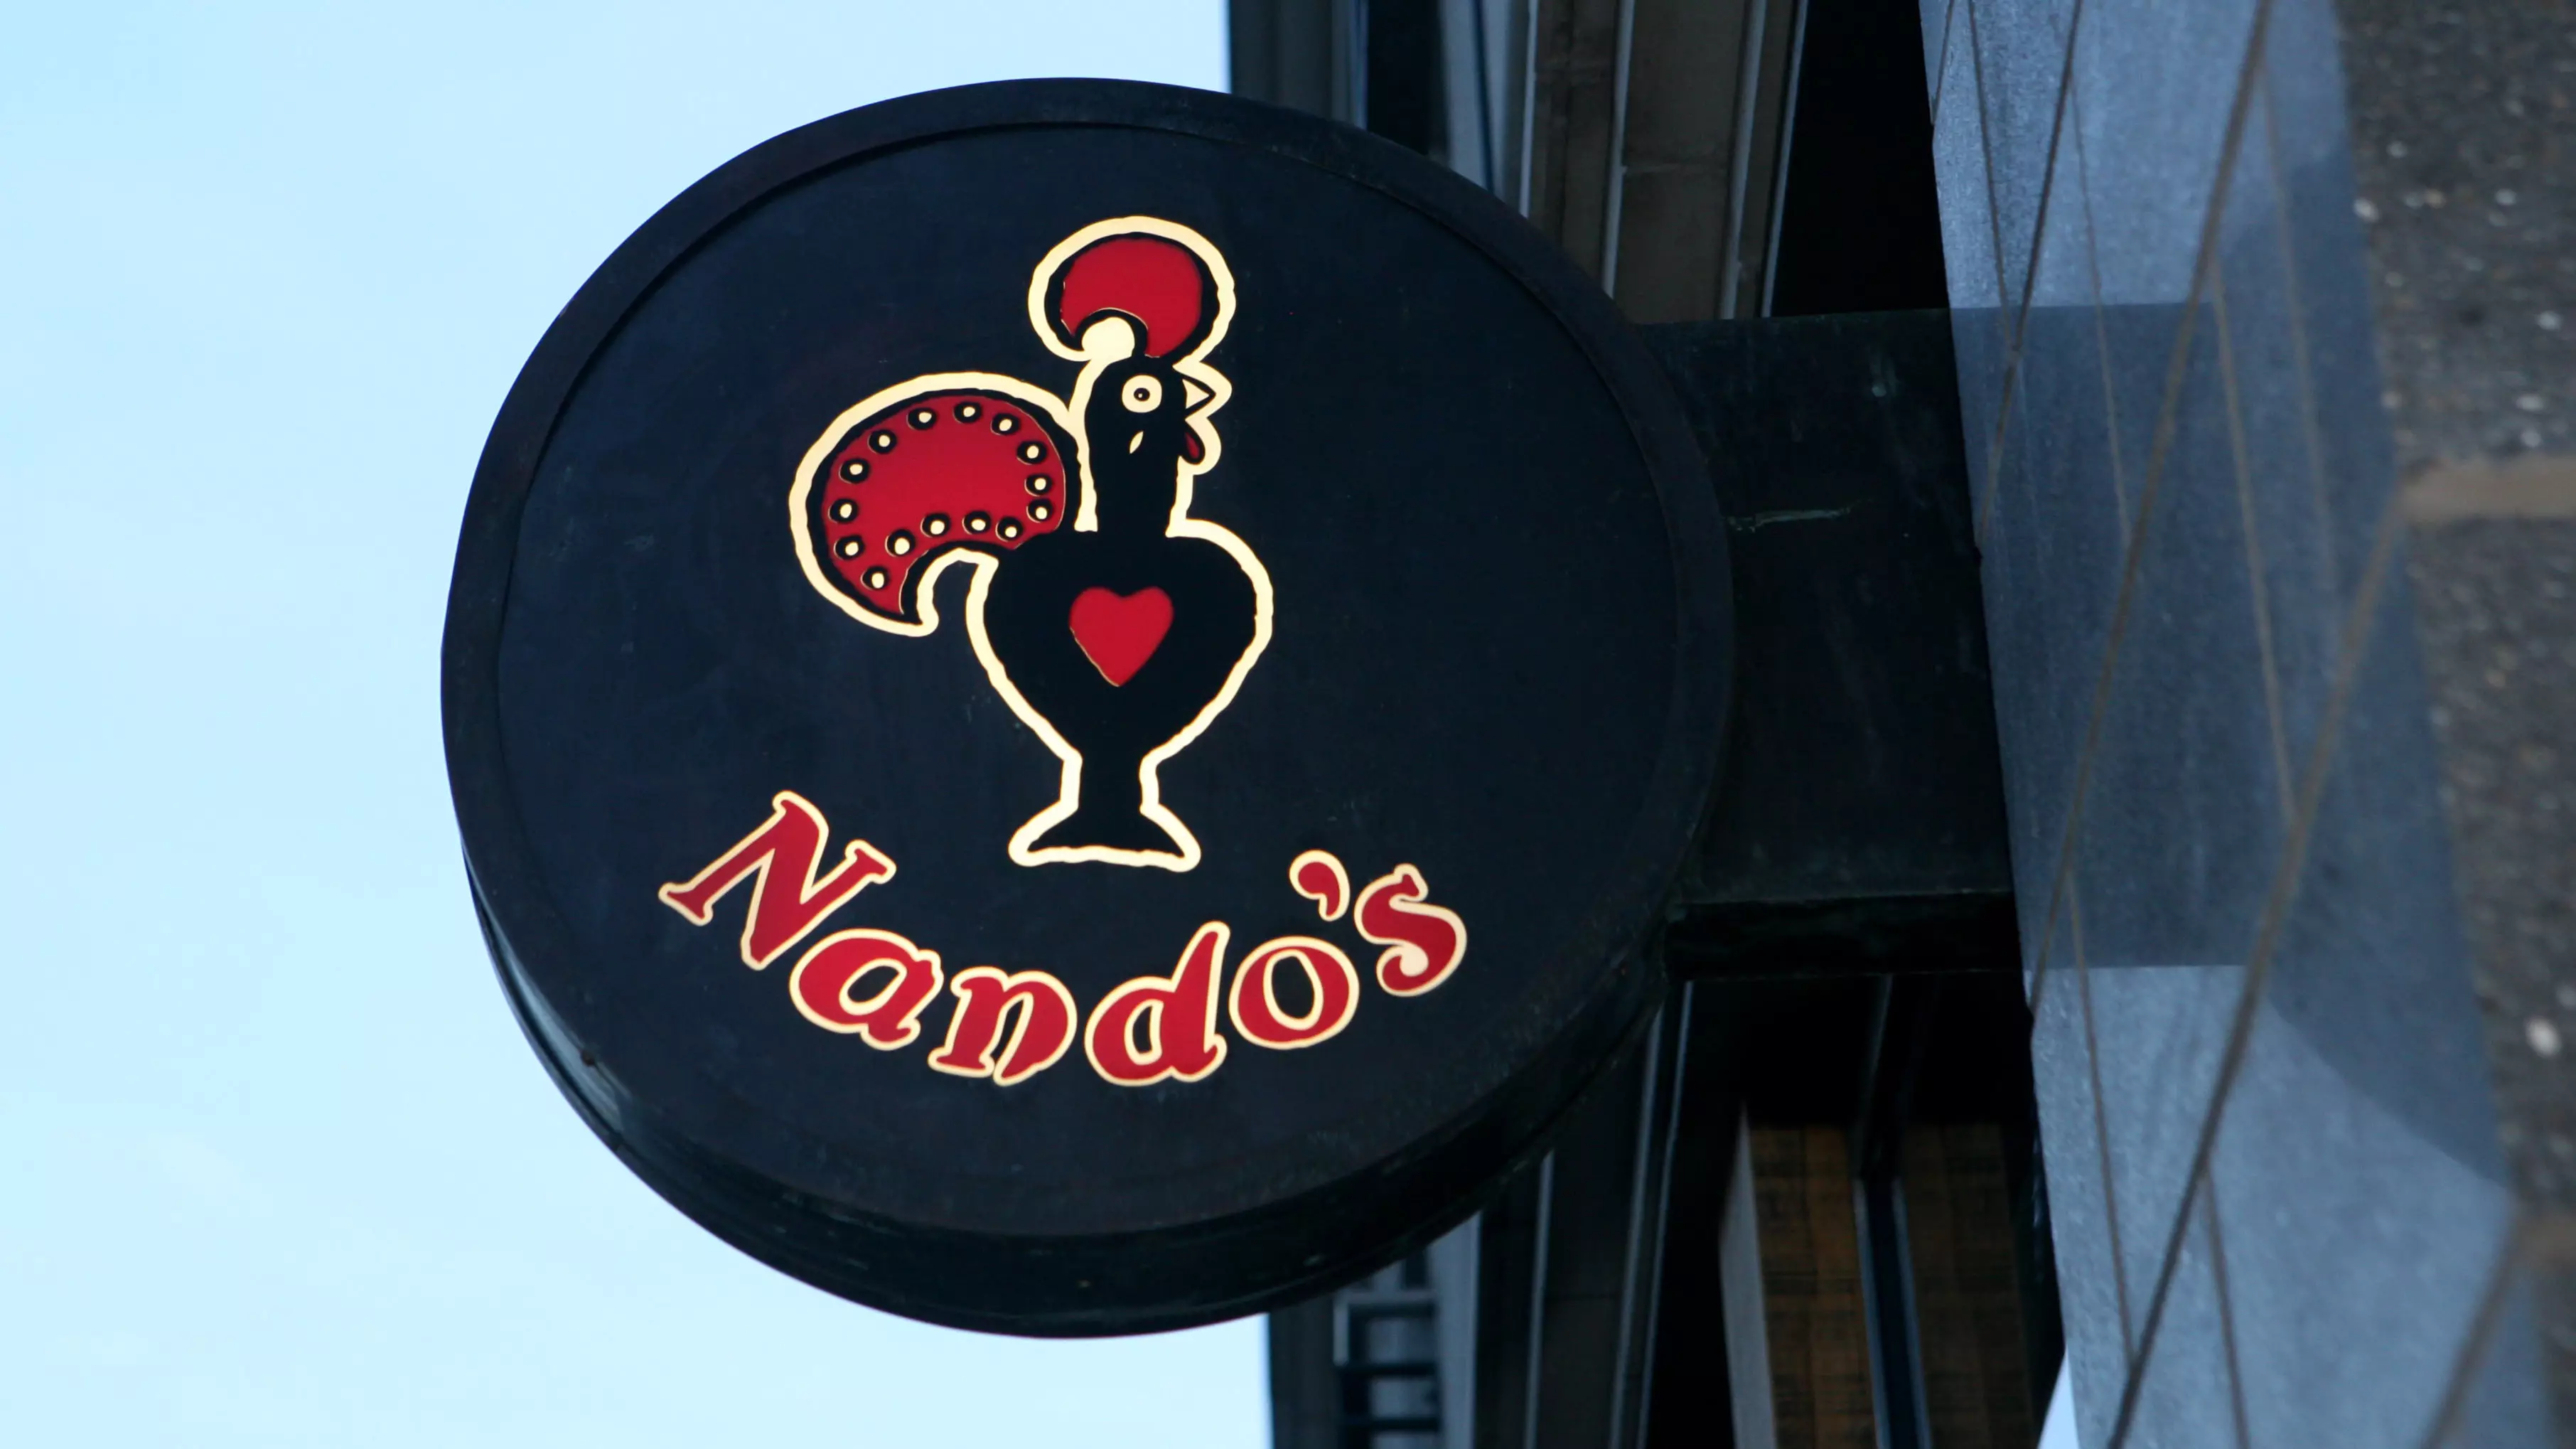 10-Year-Old Boy Kicked Out Of Nando's While On A Date With His Girlfriend